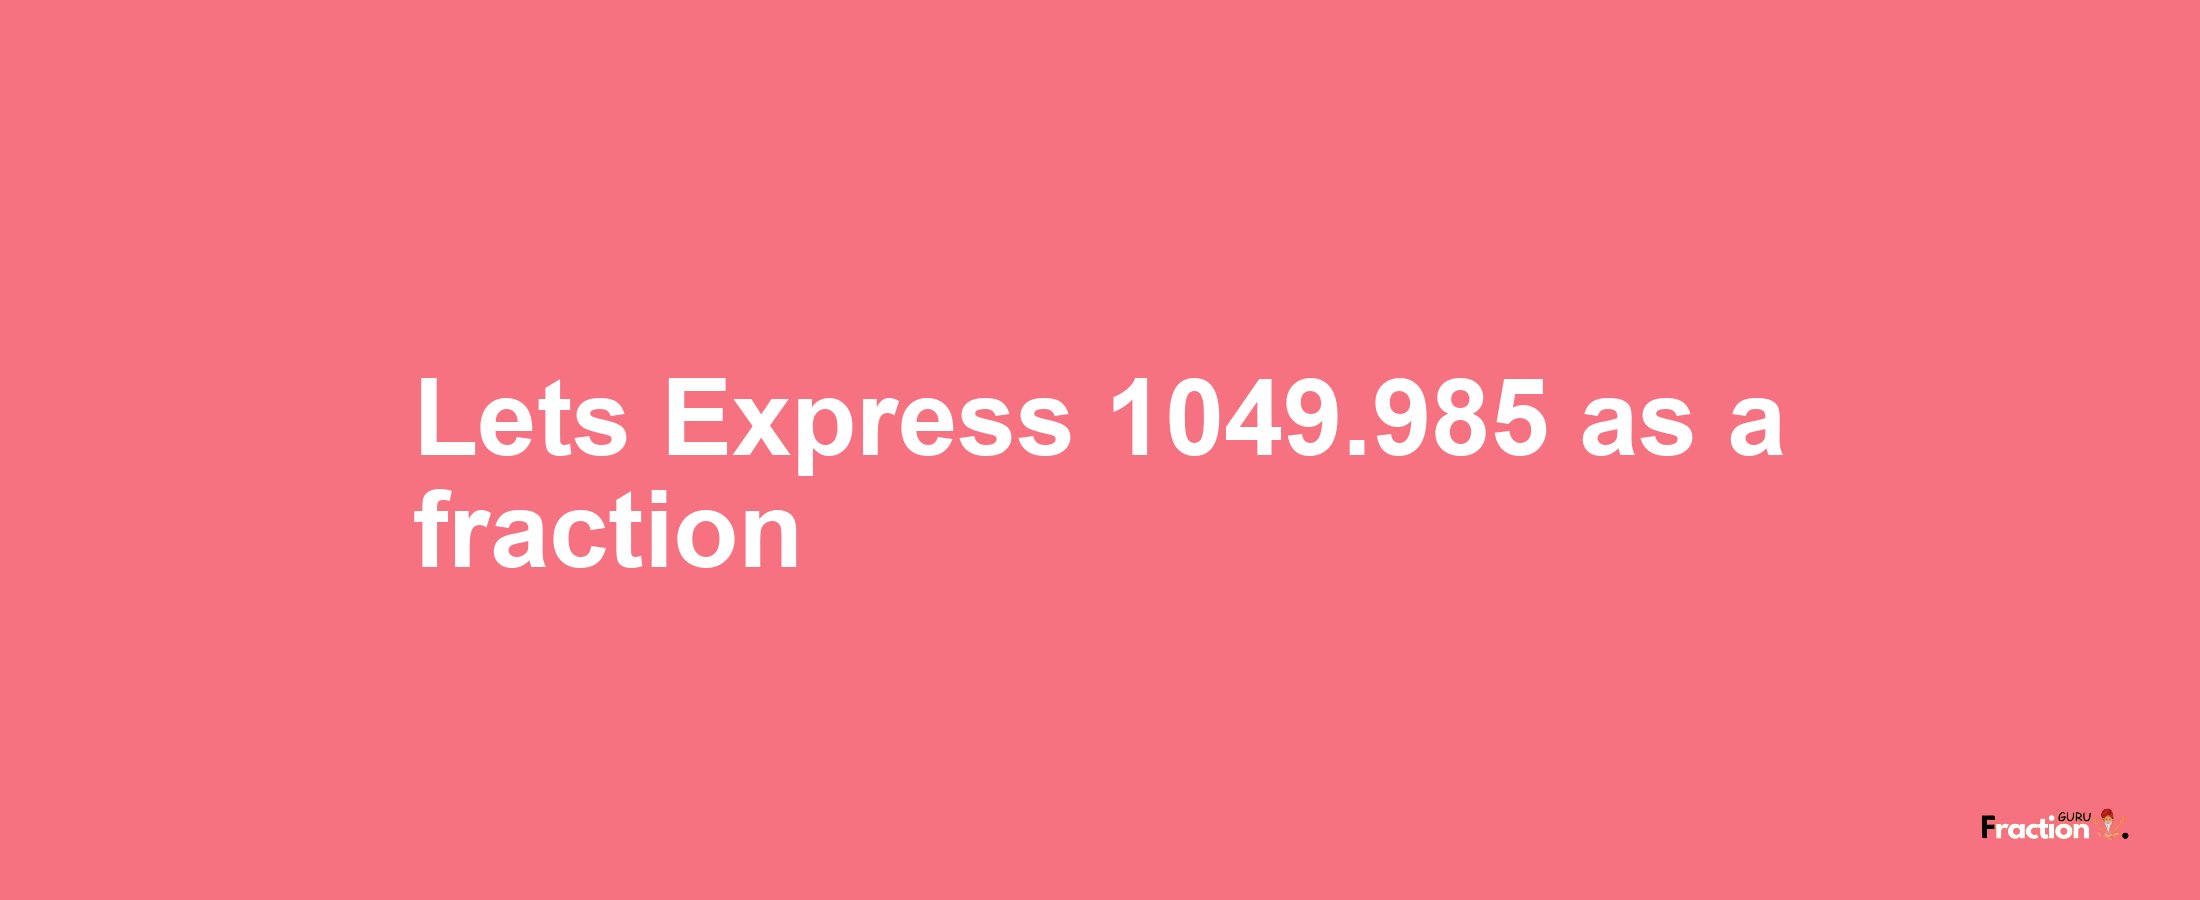 Lets Express 1049.985 as afraction